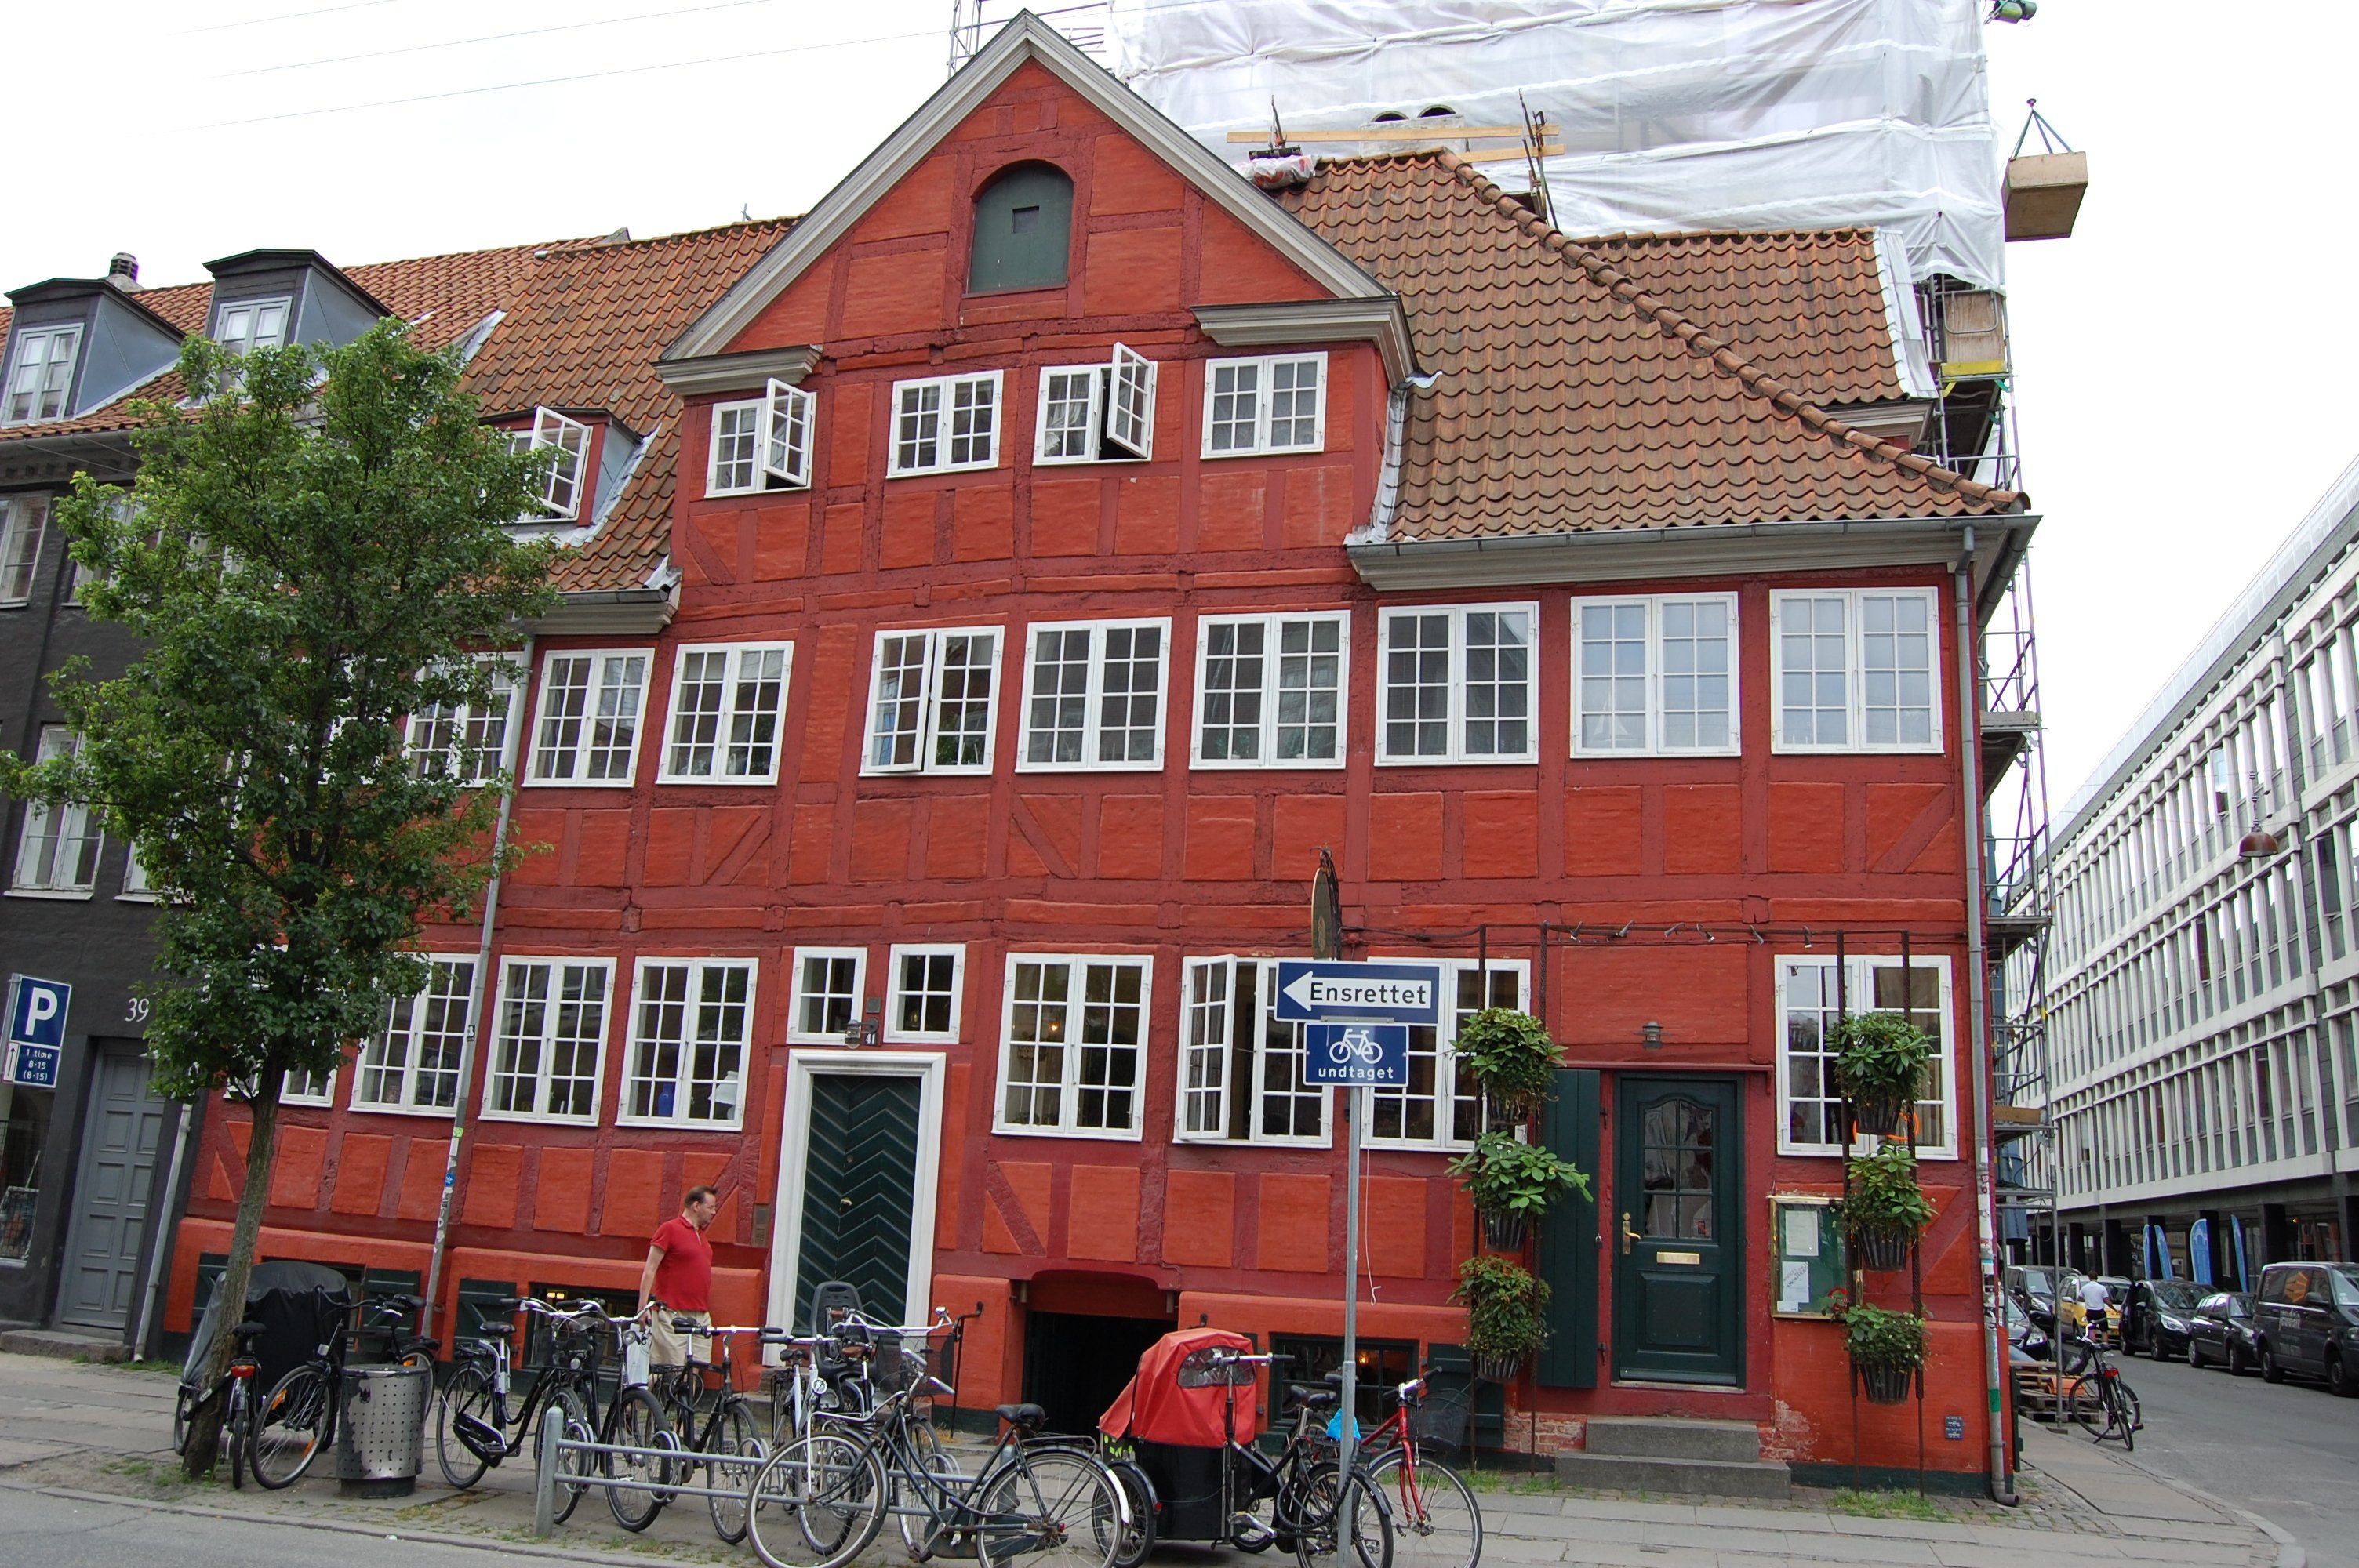 red building